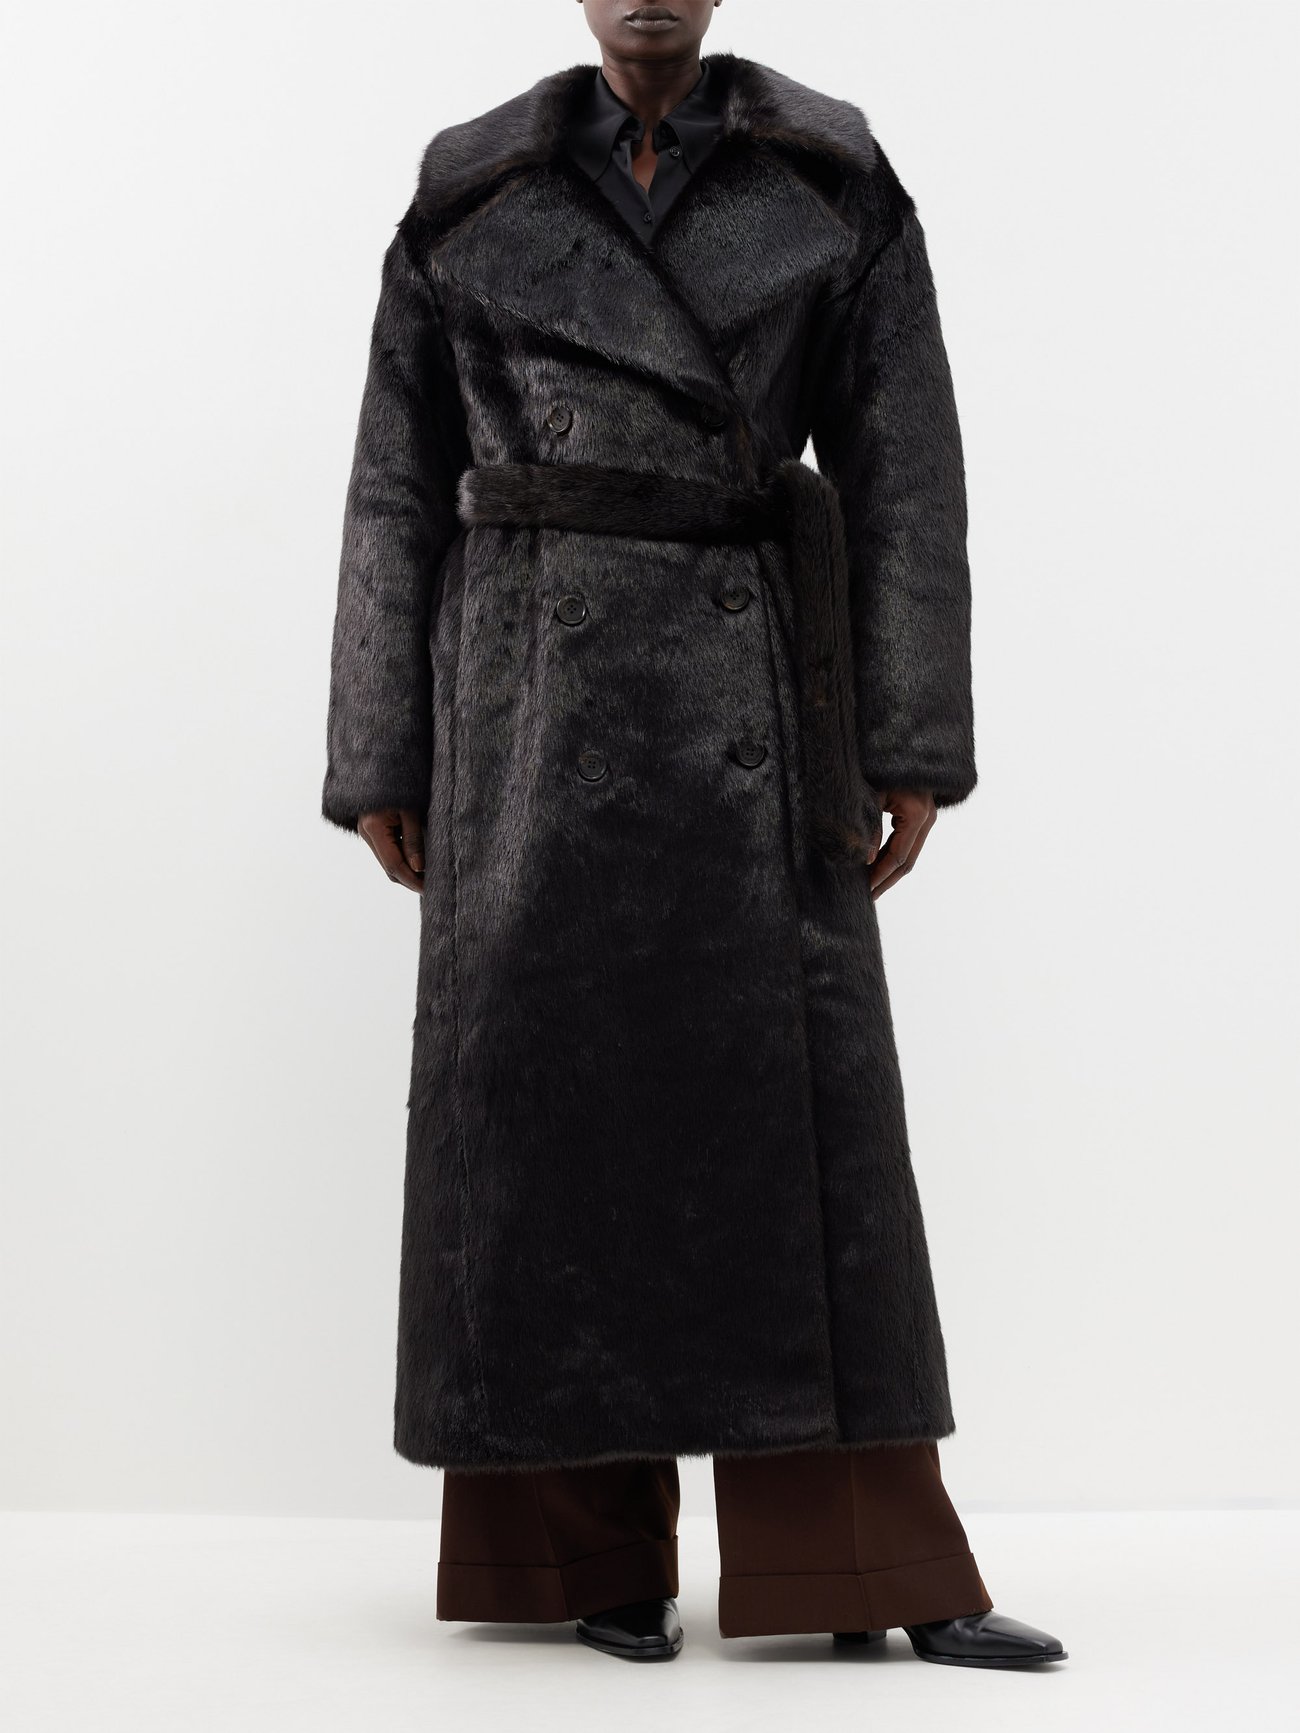 8 types of coats that never go out of style. Opt for a statement look in The Frankie Shop's dark brown Joni coat, made from glossy faux fur with a double-breasted front and optional belt.